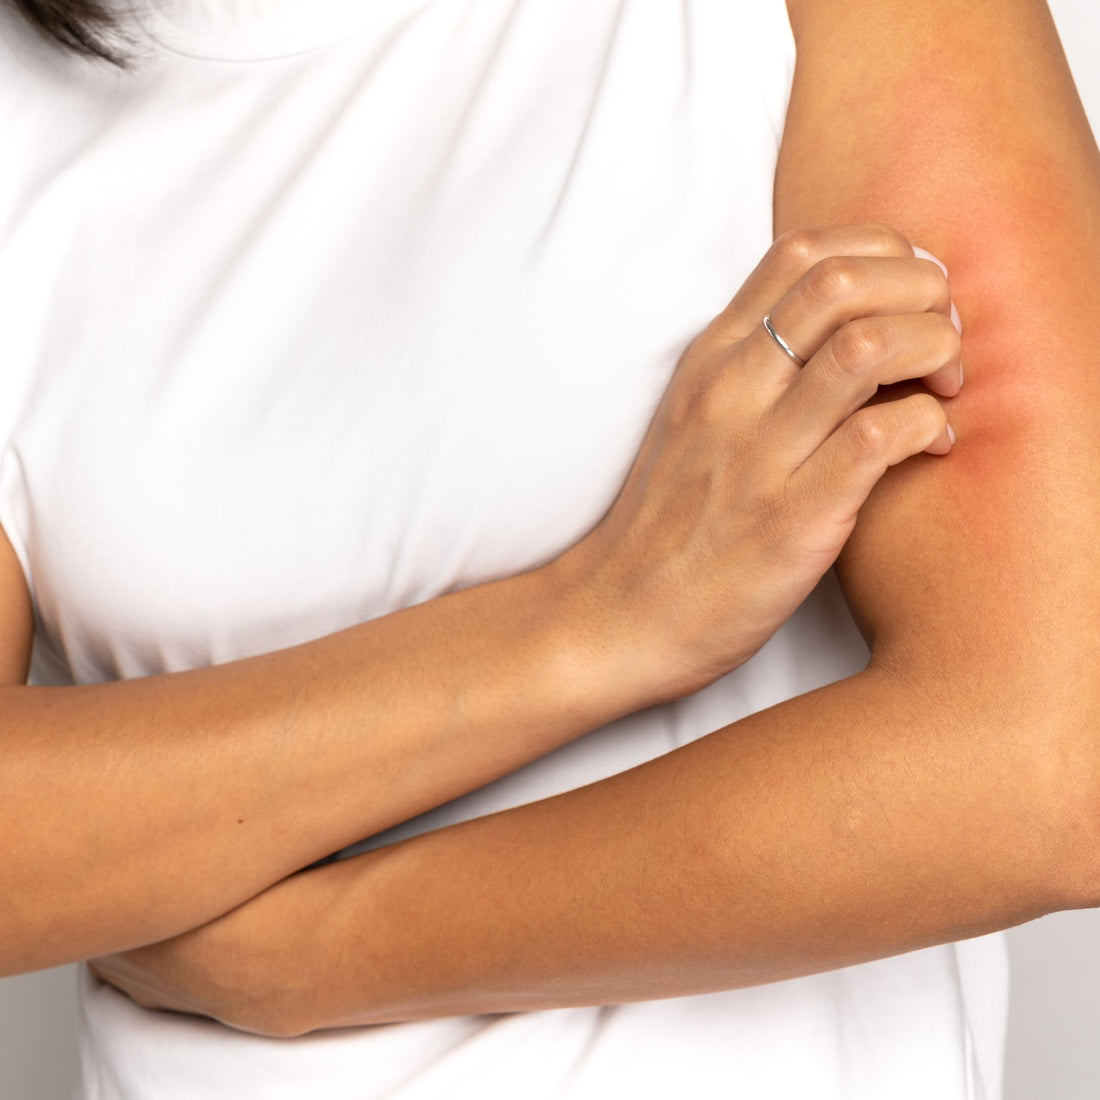 Skin Irritation Caused by Your Clothing